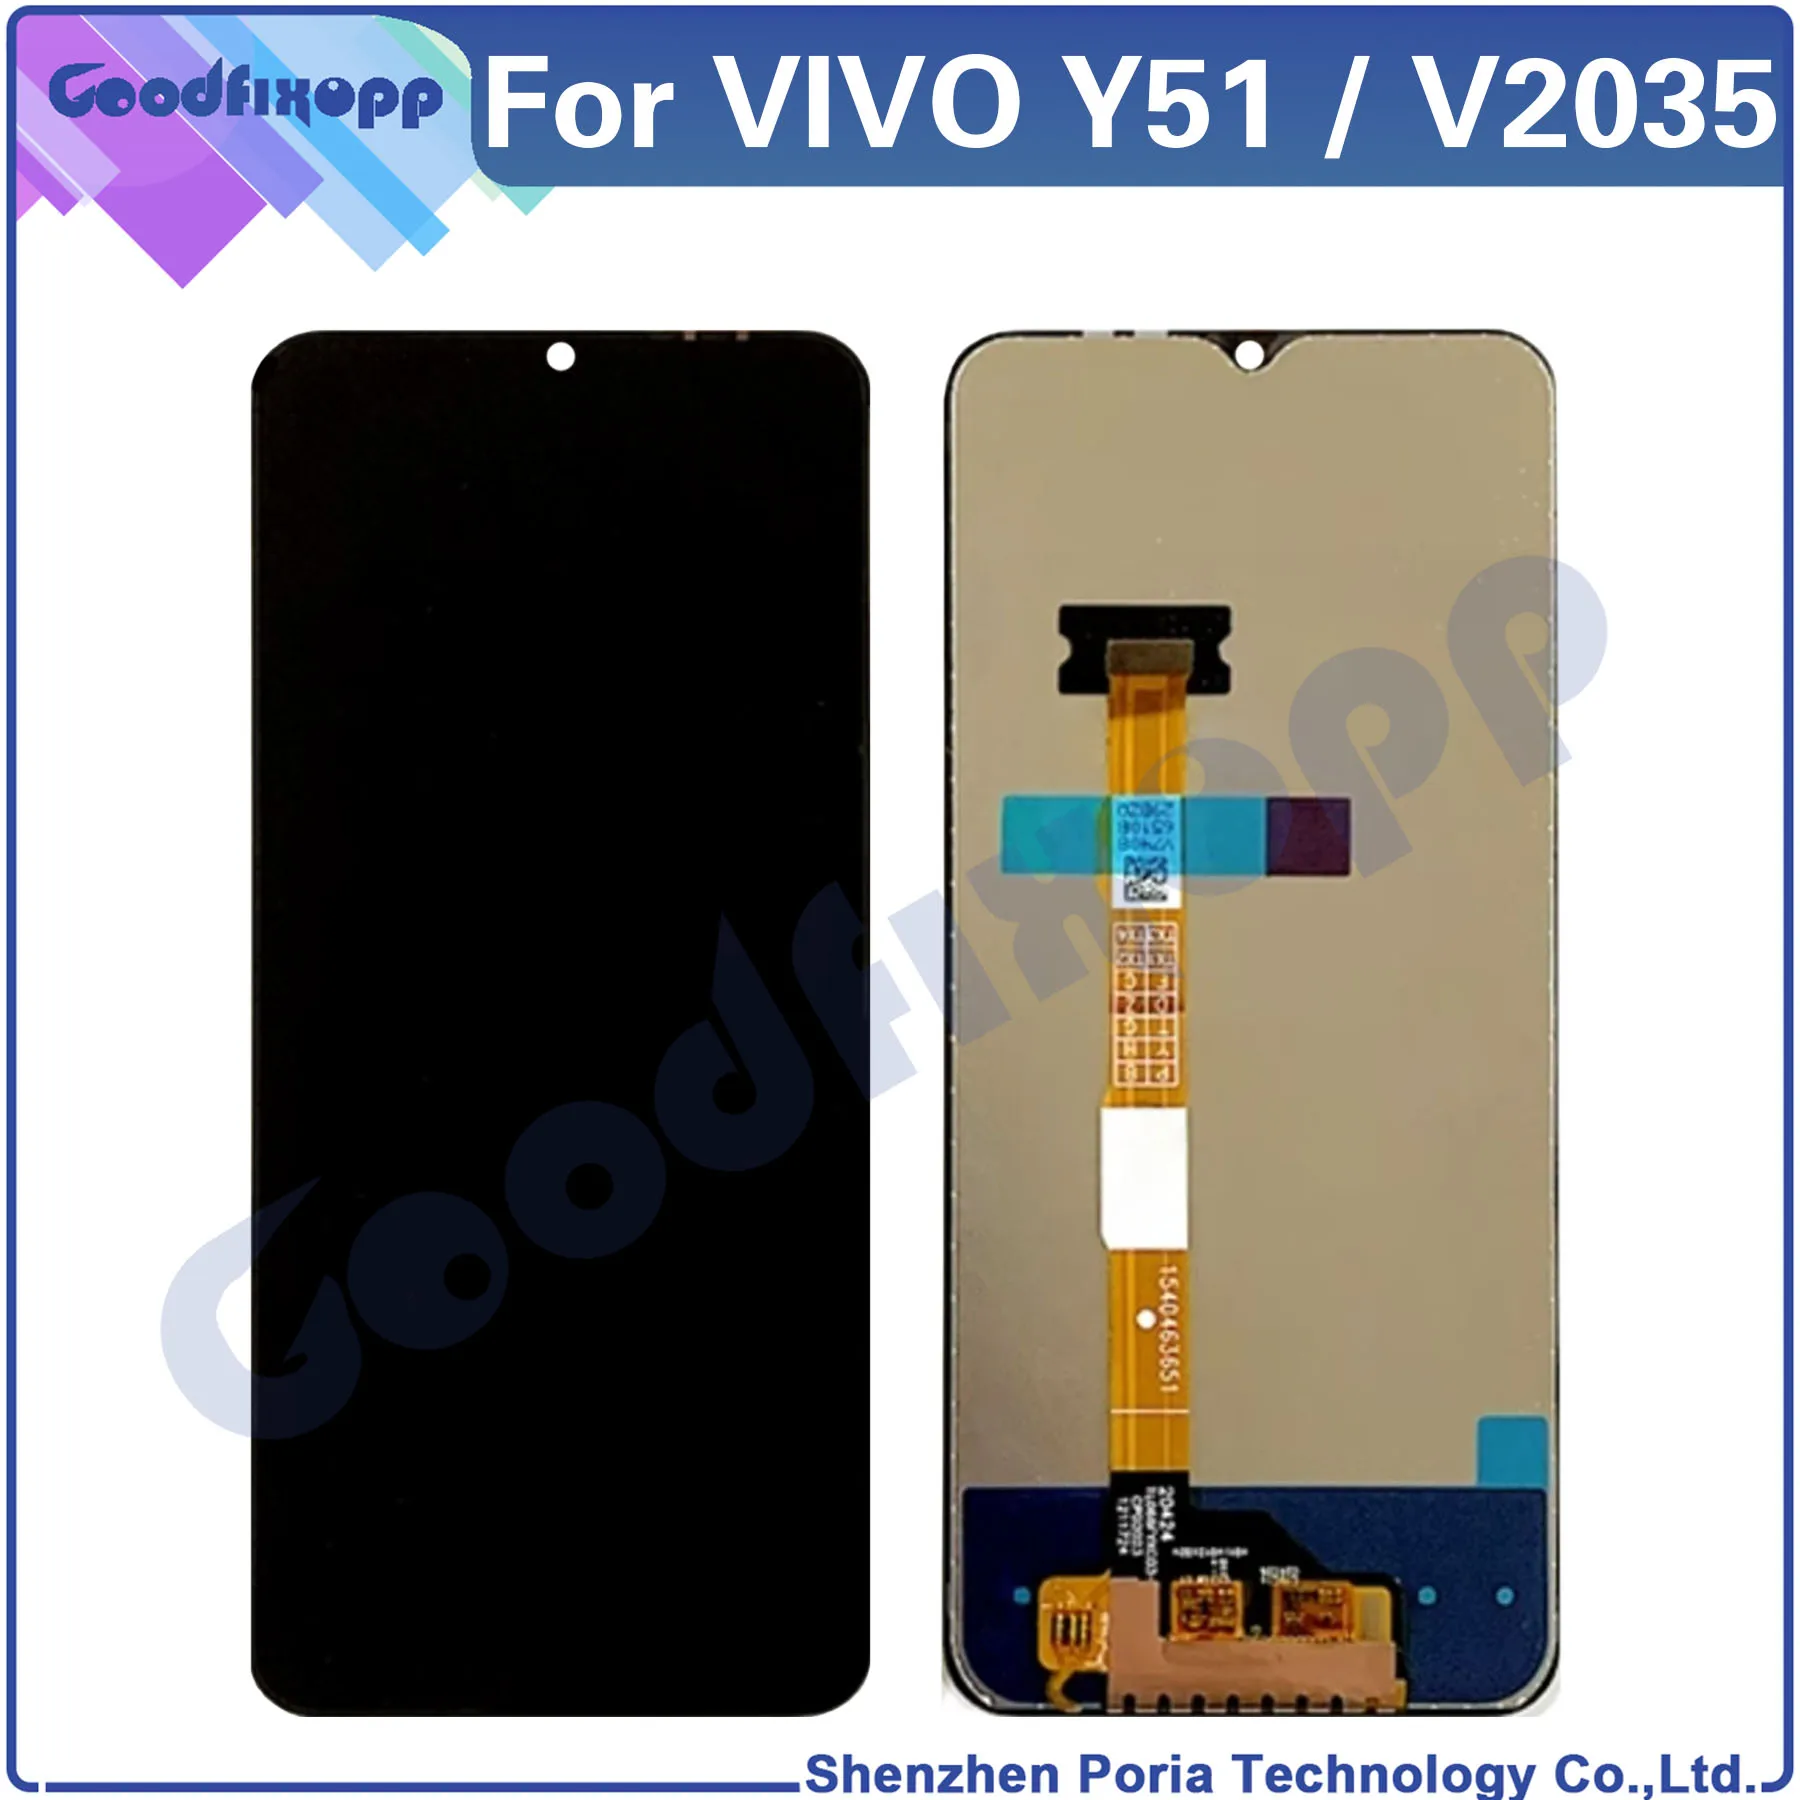 

For VIVO Y51 2020 V2035 LCD Display Touch Screen Digitizer Assembly Repair Parts Replacement